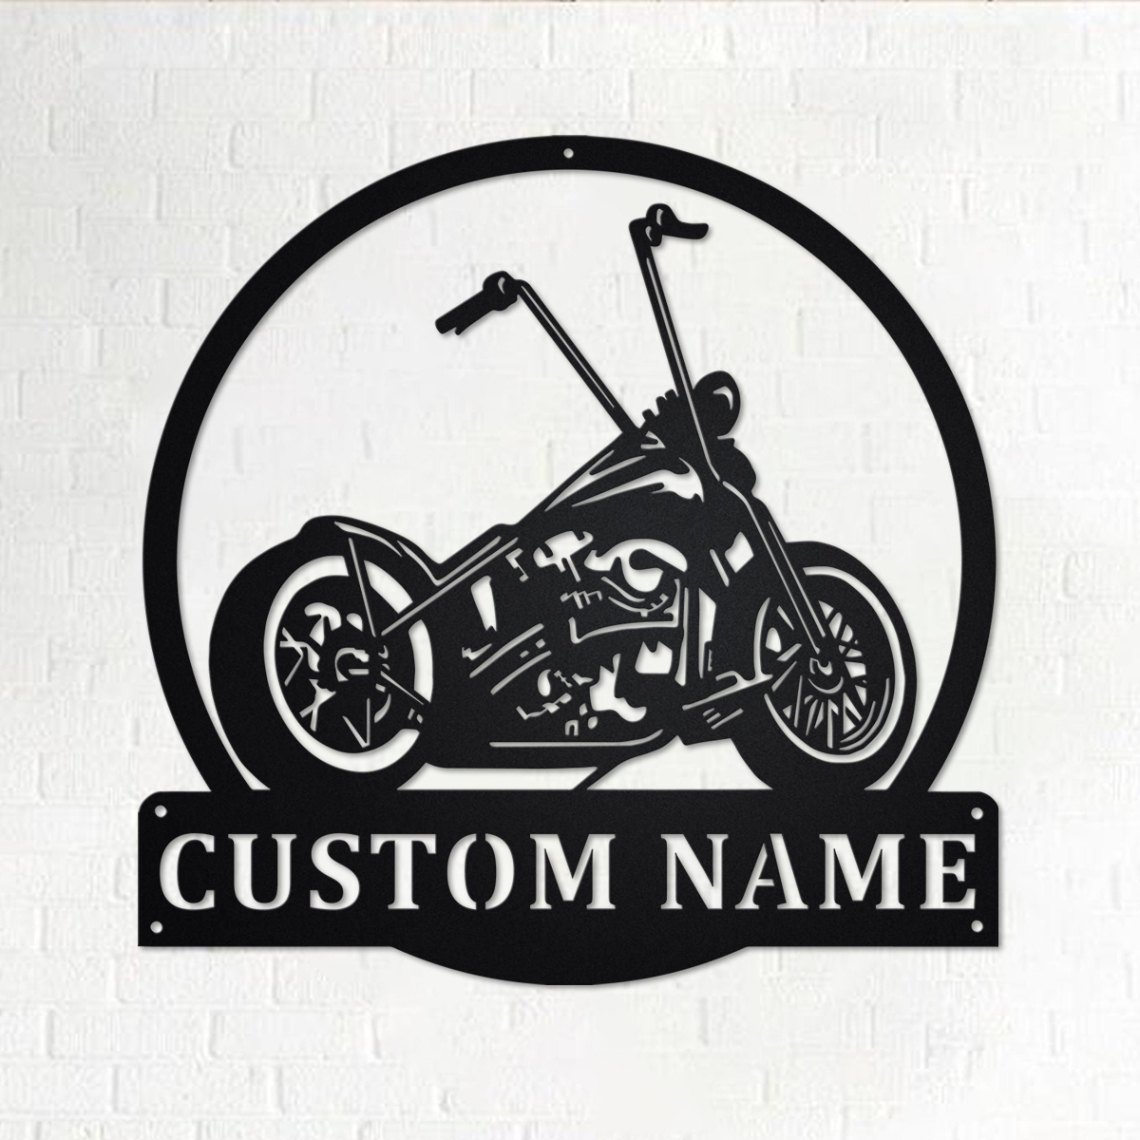 Custom Motorcycle Metal Wall Art, Personalized Biker Name Sign Decoration For Room, Motorcycle Home Decor, Custom Motorcycle, Biker Gift